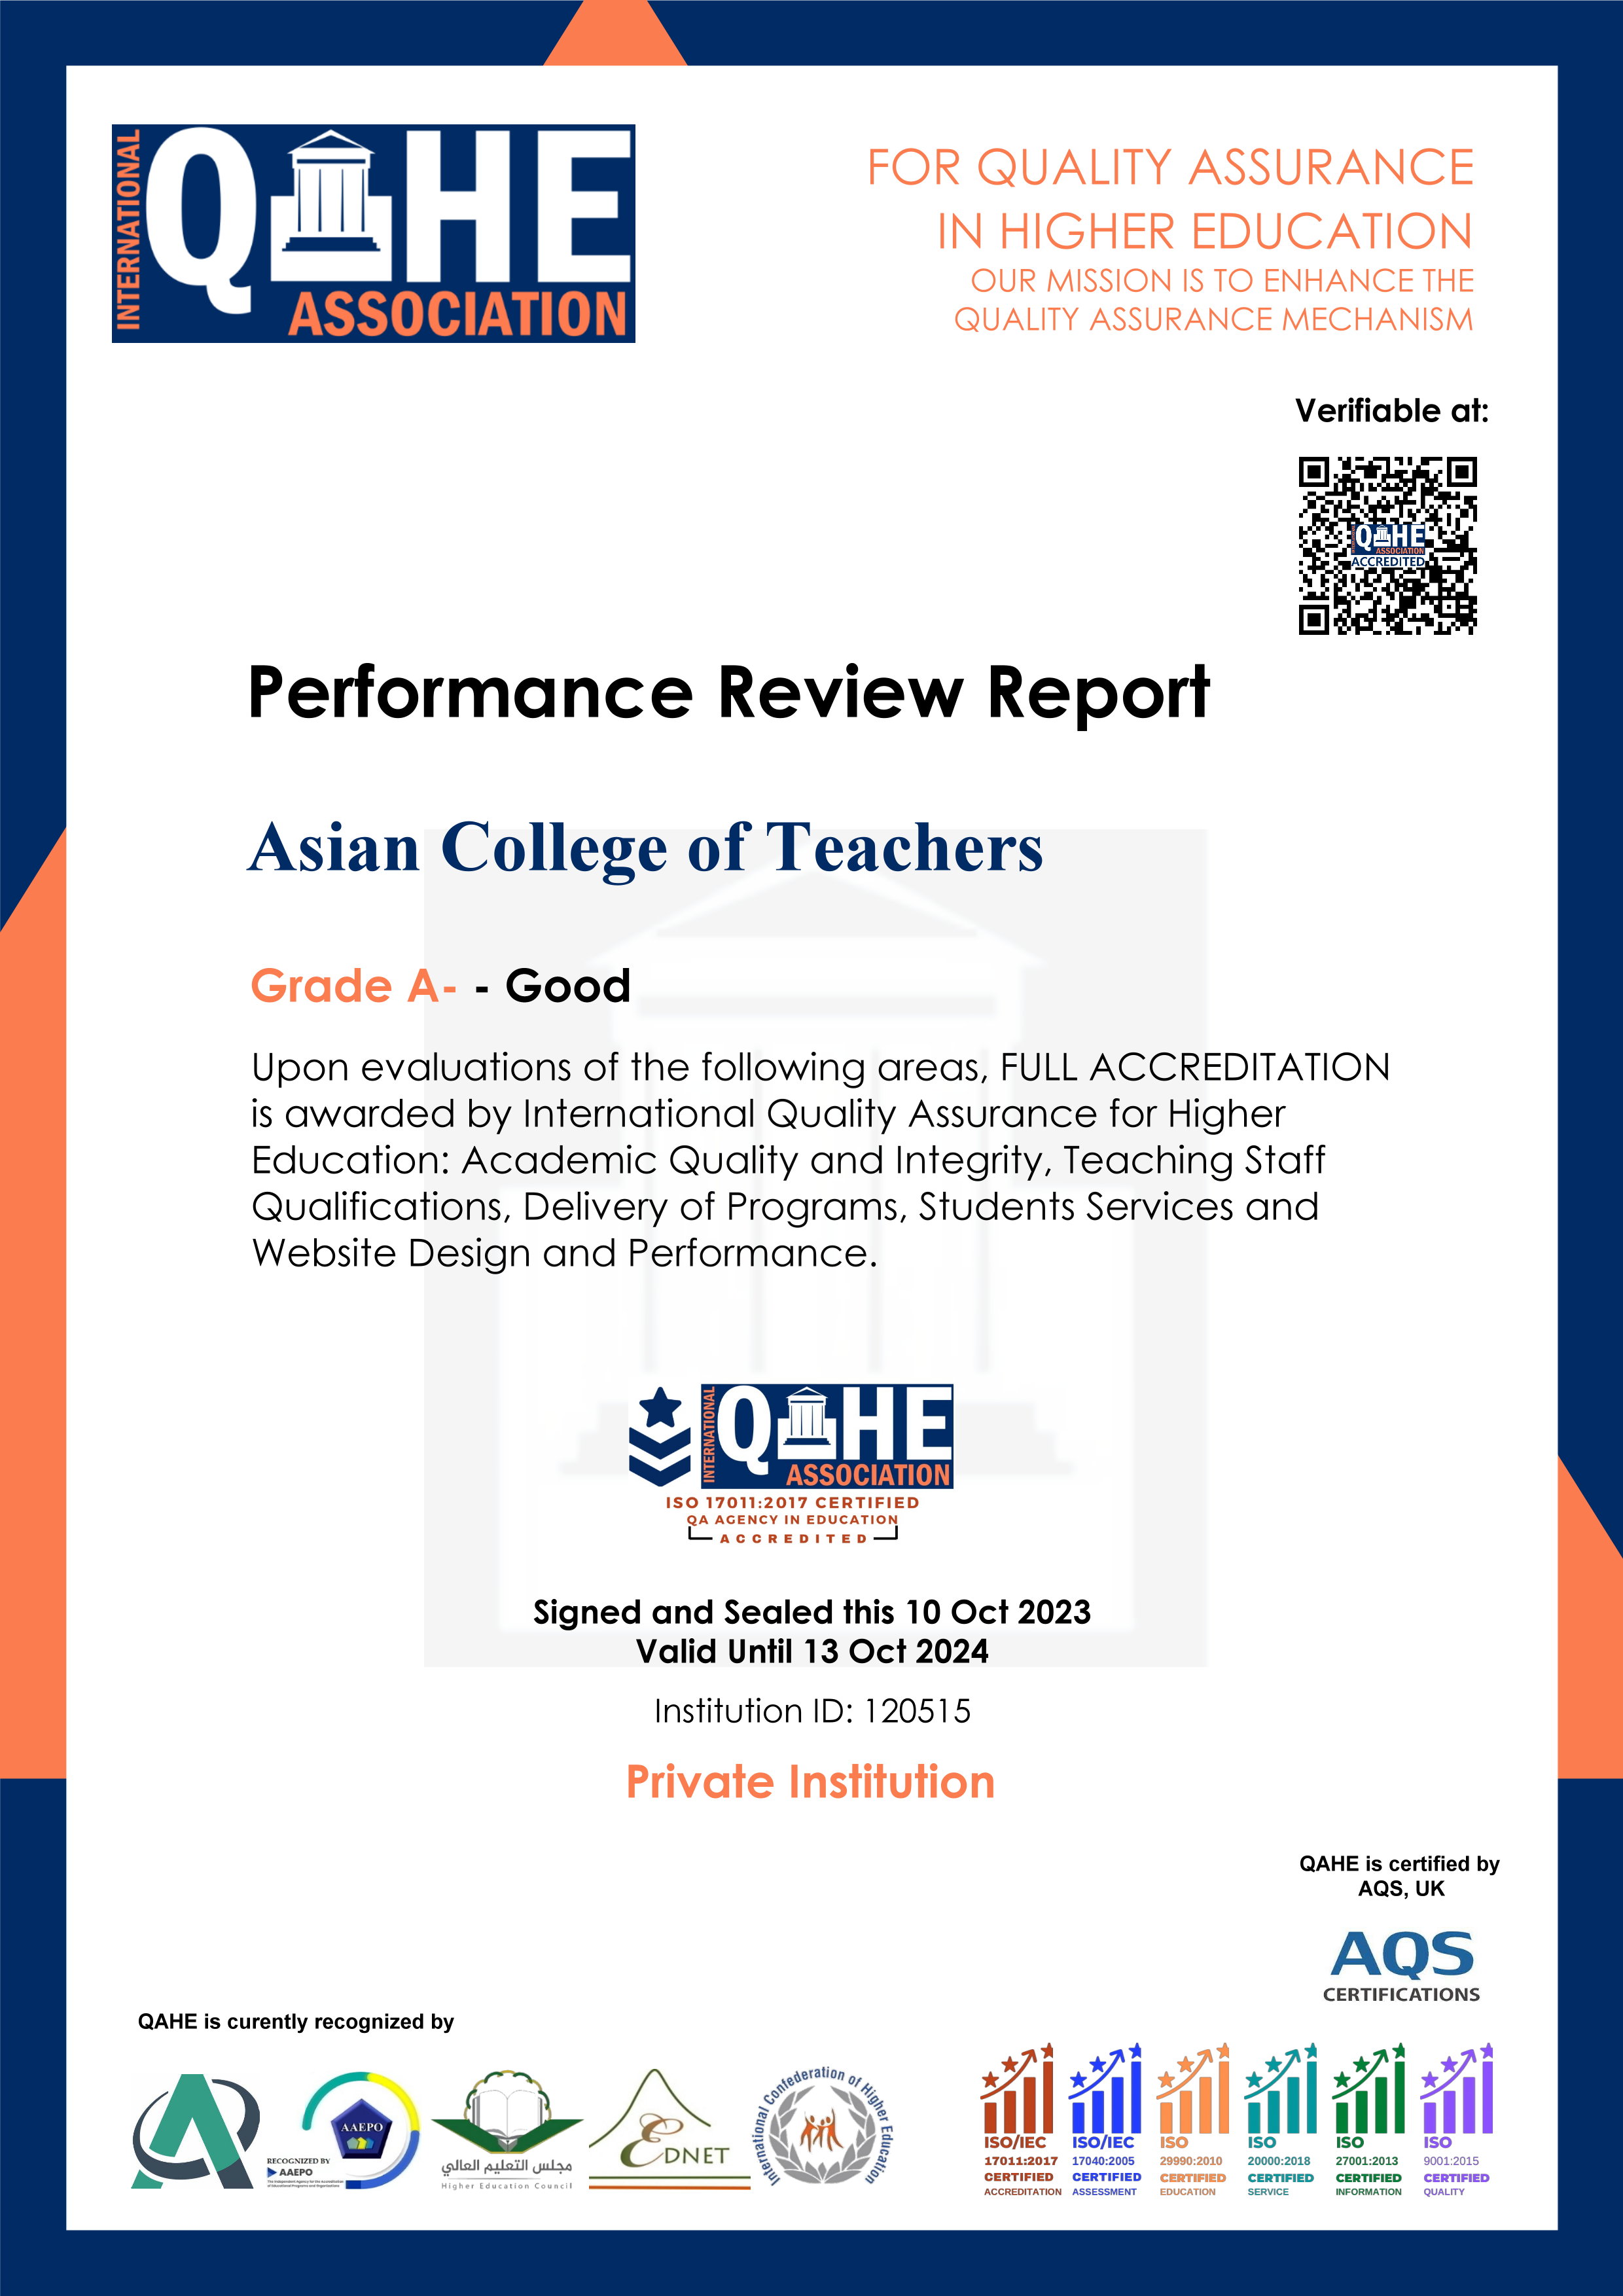 ACT’s performance review report by QAHE